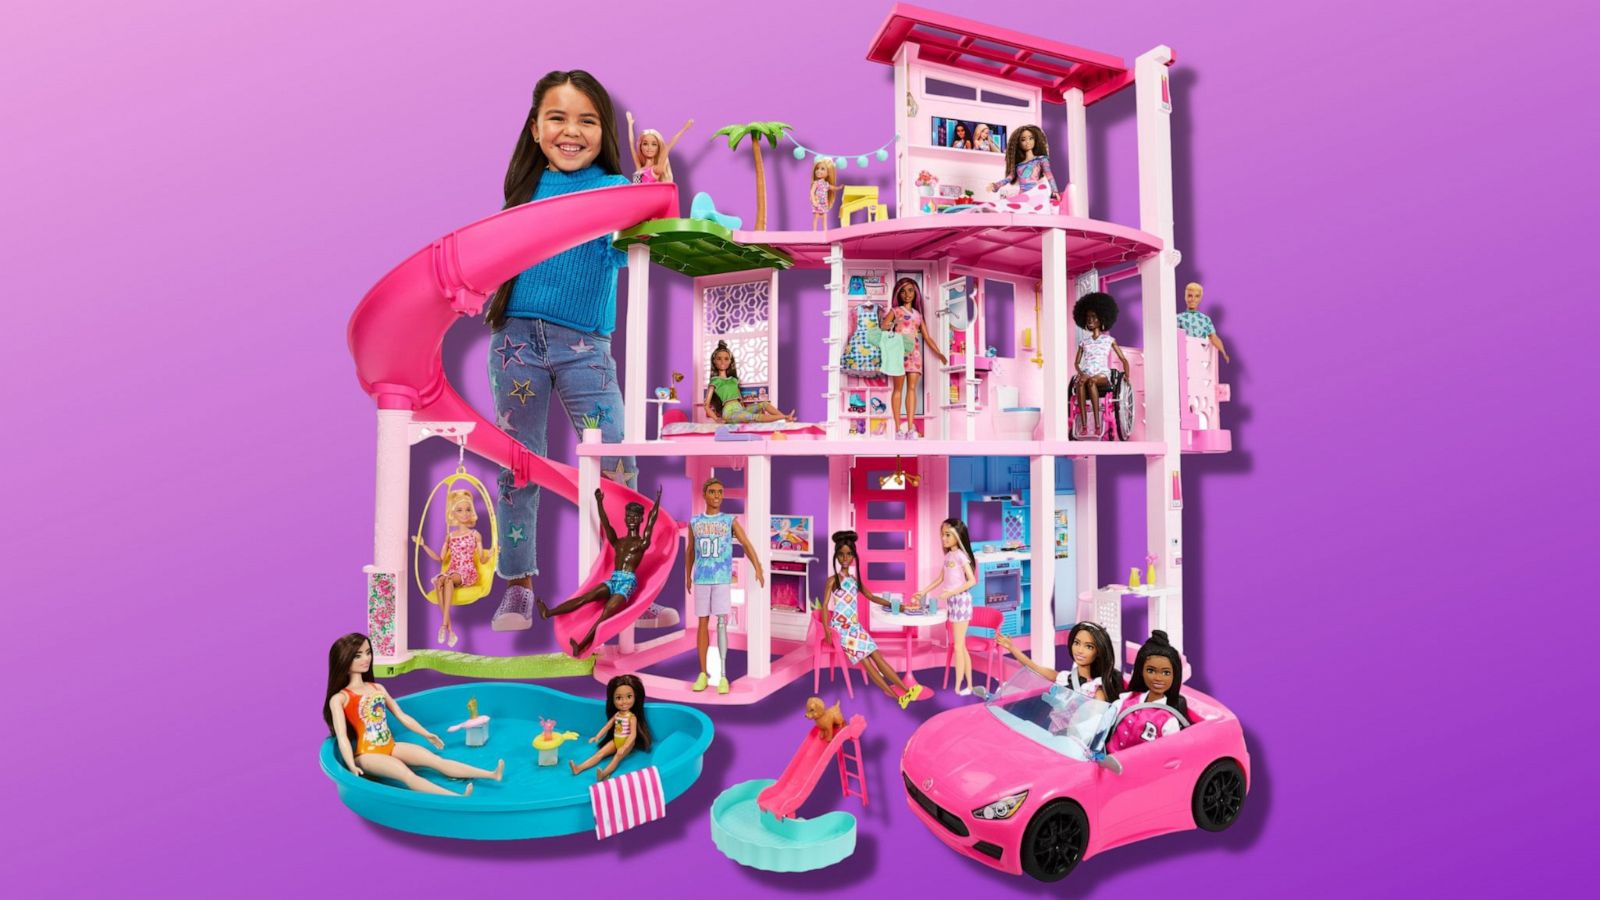 New Barbie DreamHouse has an incredible, updated look - ABC News